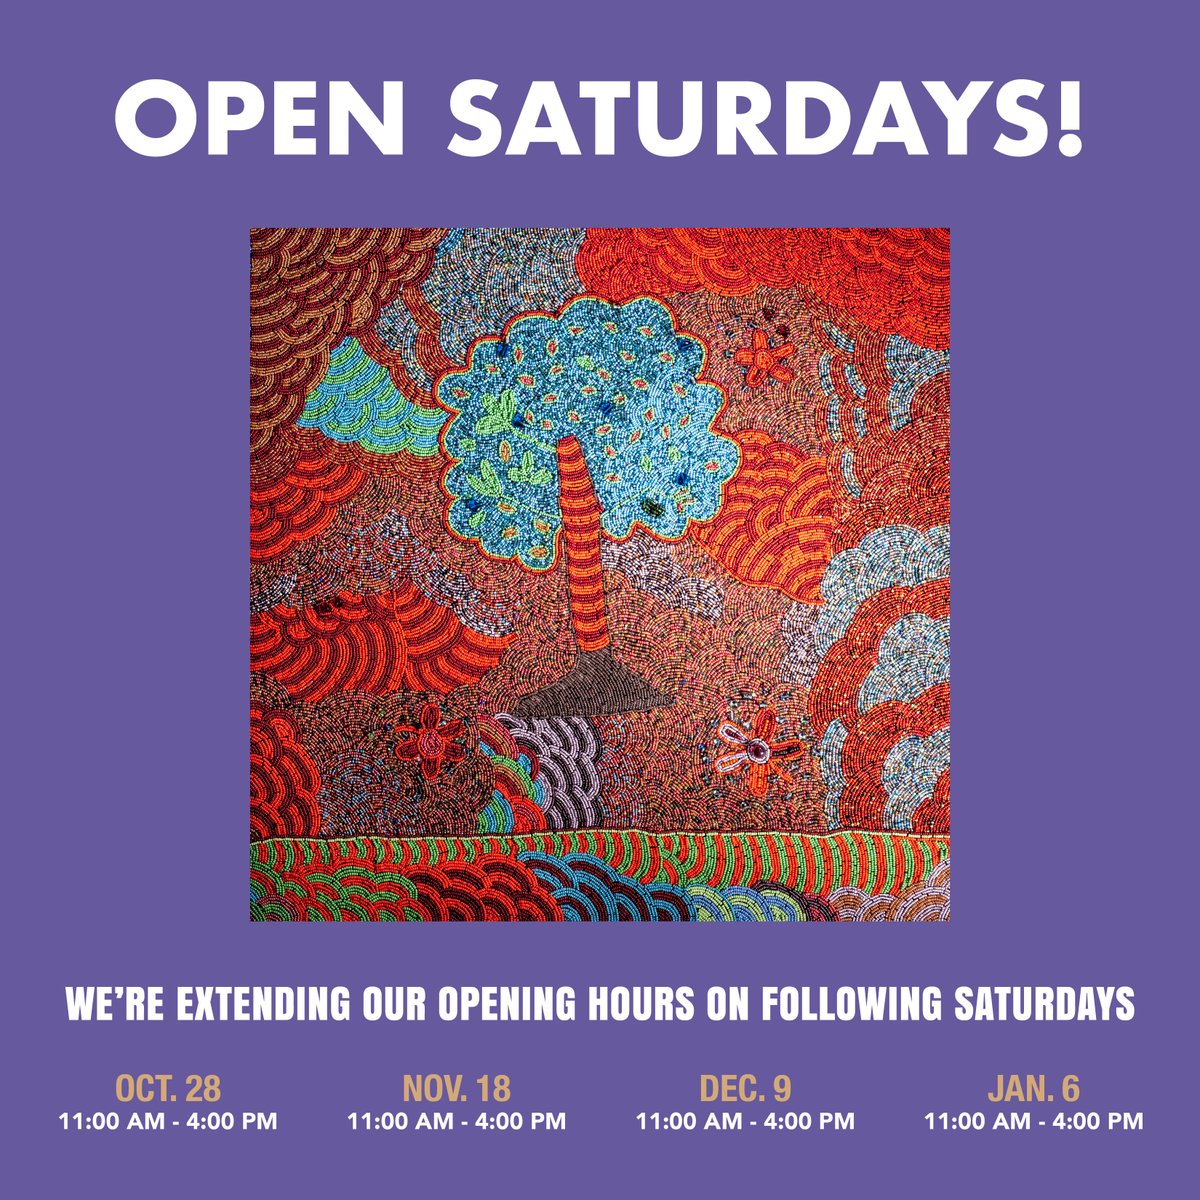 🎨✨Exciting News! Extra Weekend Openings at the Gallery! Can only make it on weekends? We've got you covered! Due to popular demand for our must-see exhibition, 'UBUHLE WOMEN: Beadwork and the Art of Independence,' we're extending our opening hours on Saturdays just for you!